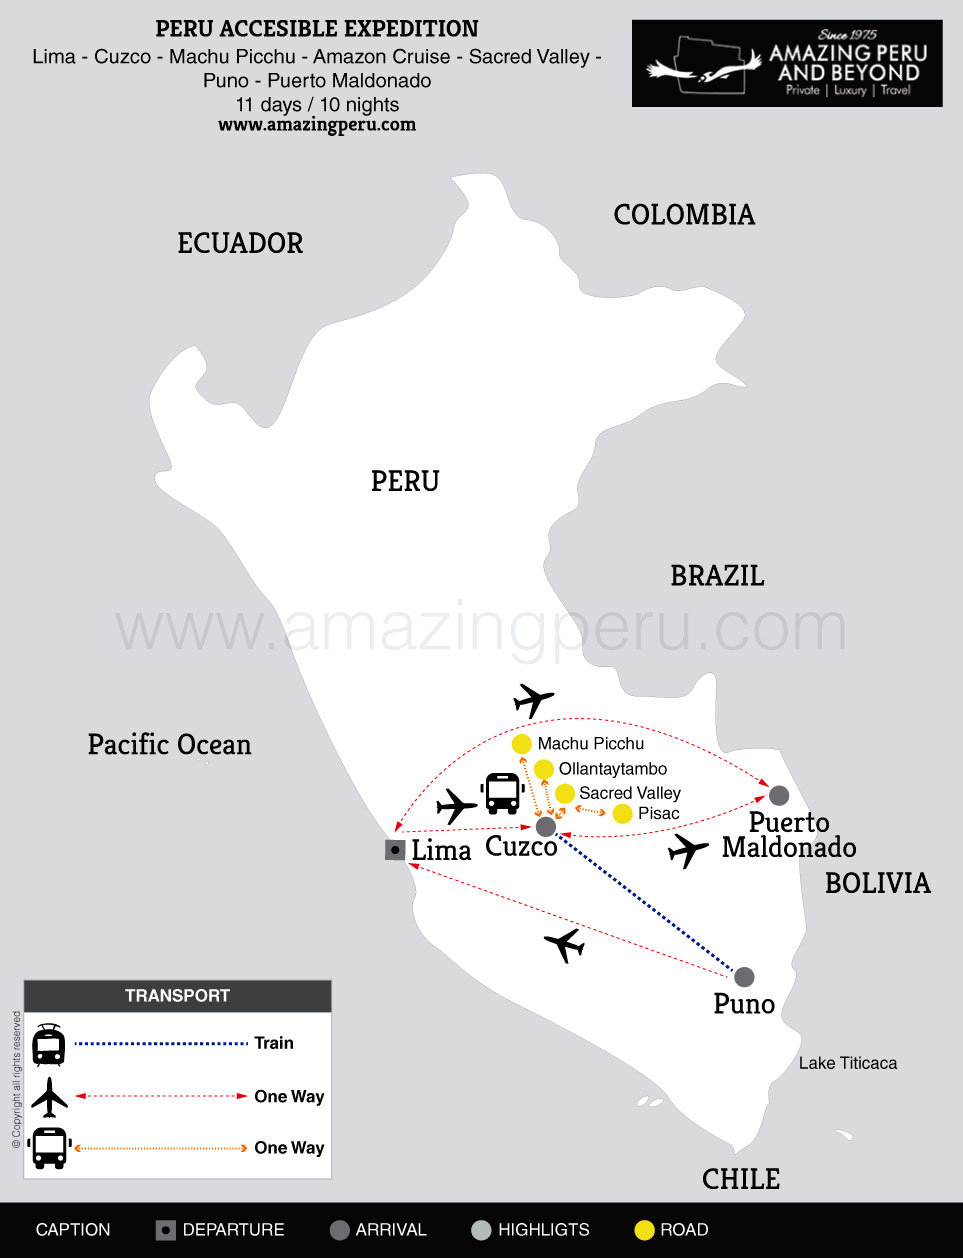 2024 Peru Accesible Expedition - 11 days / 10 nights.